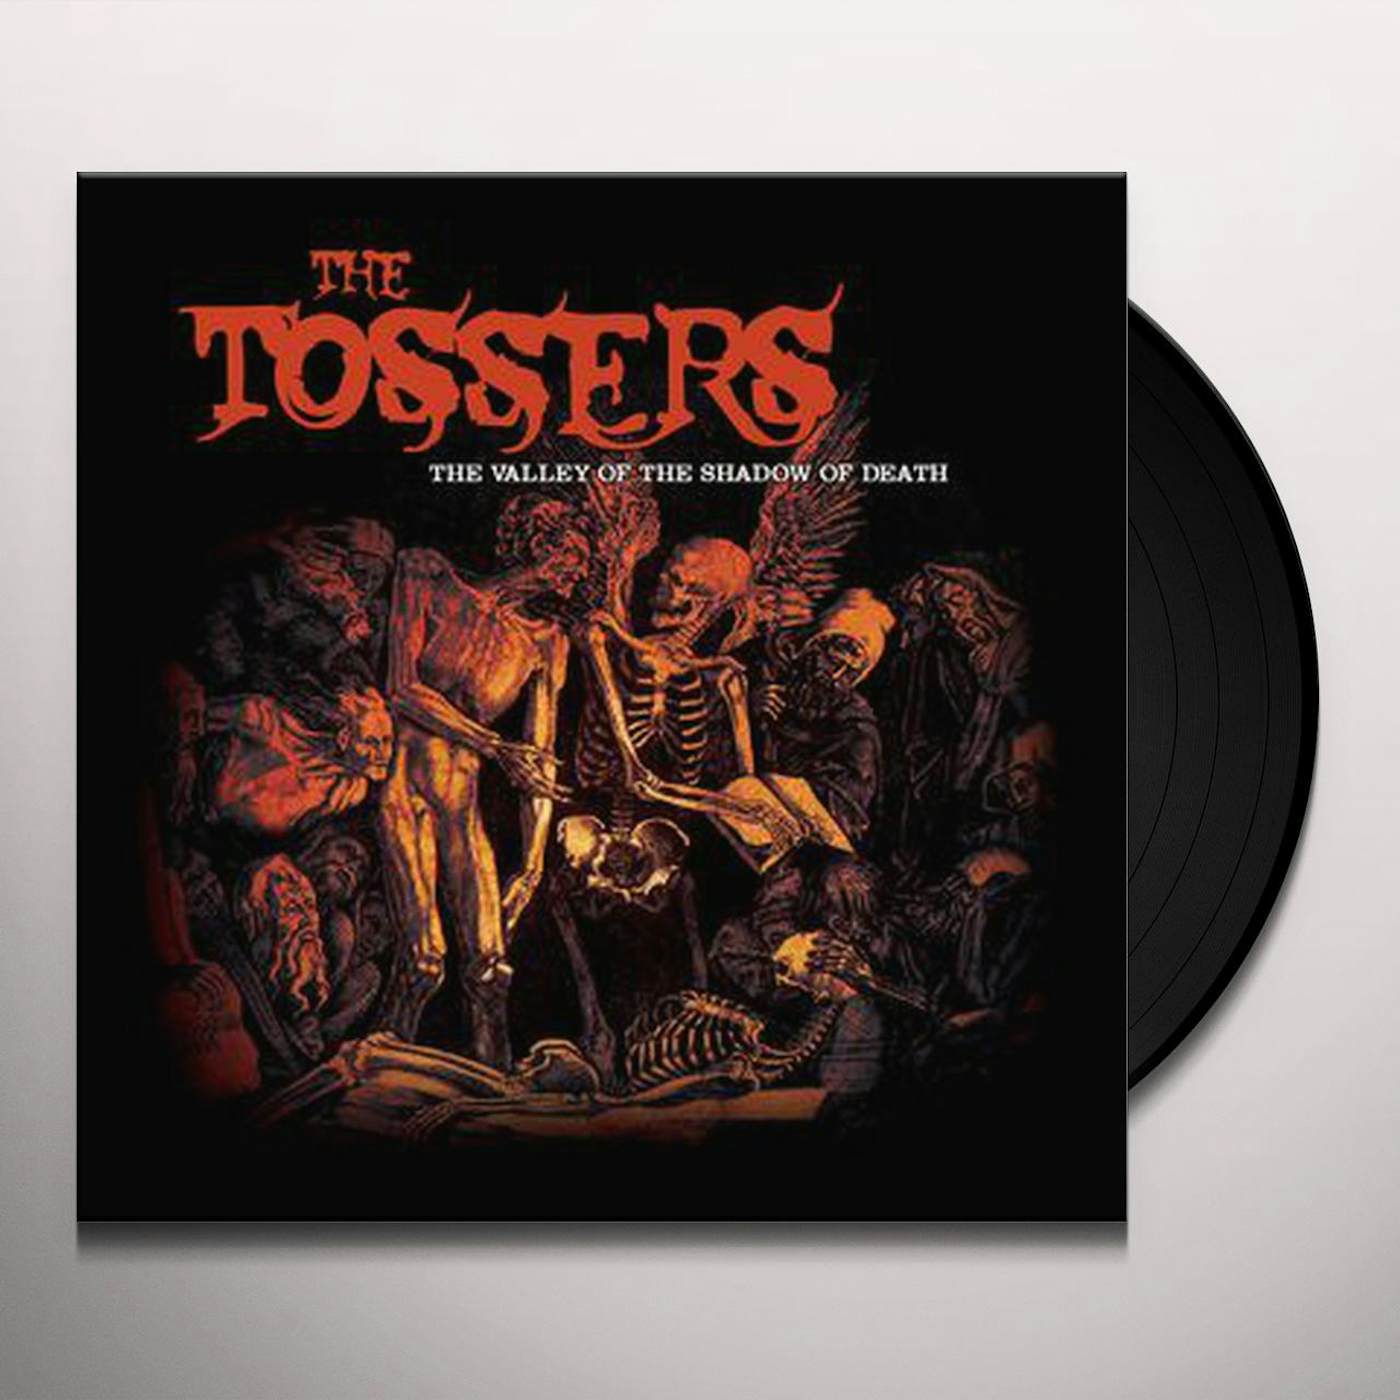 The Tossers VALLEY OF THE SHADOW OF DEATH Vinyl Record